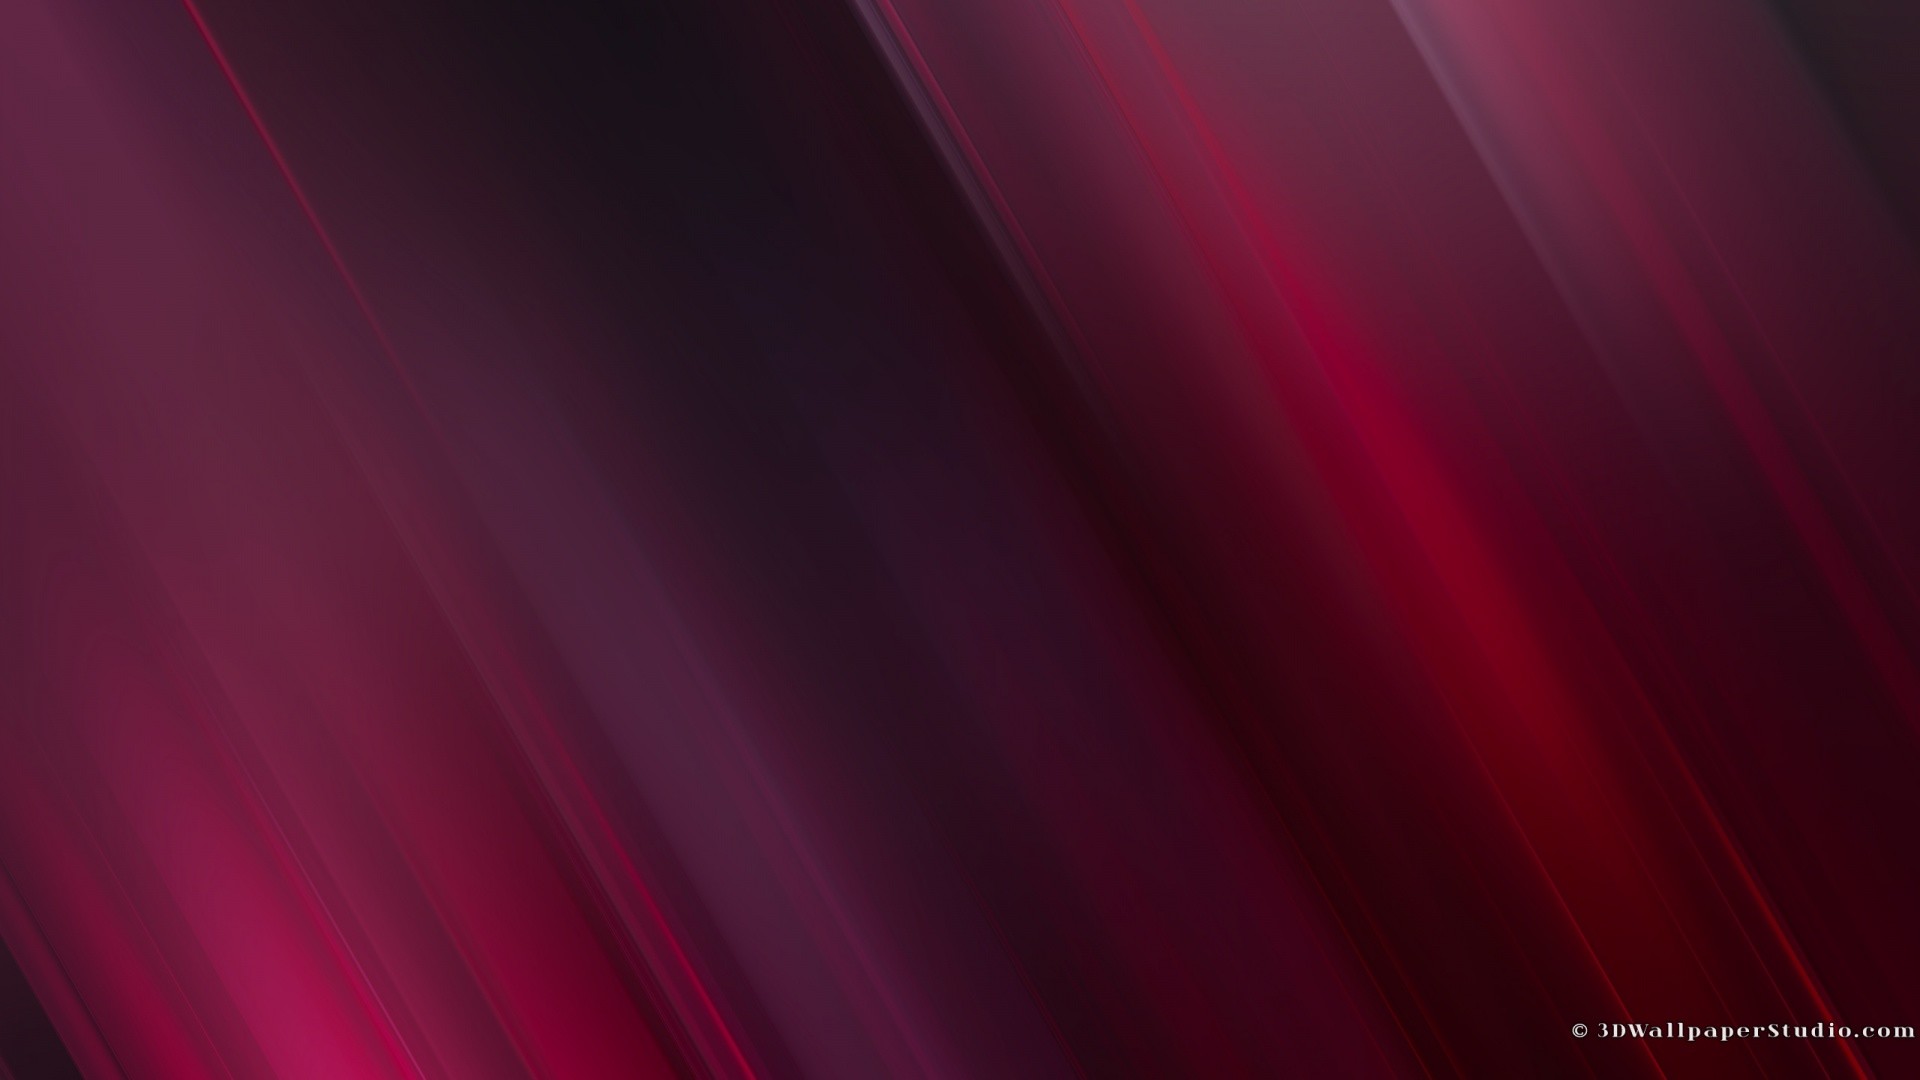 1920x1080 in black red green and gold abstract wallpapers latest abstract .